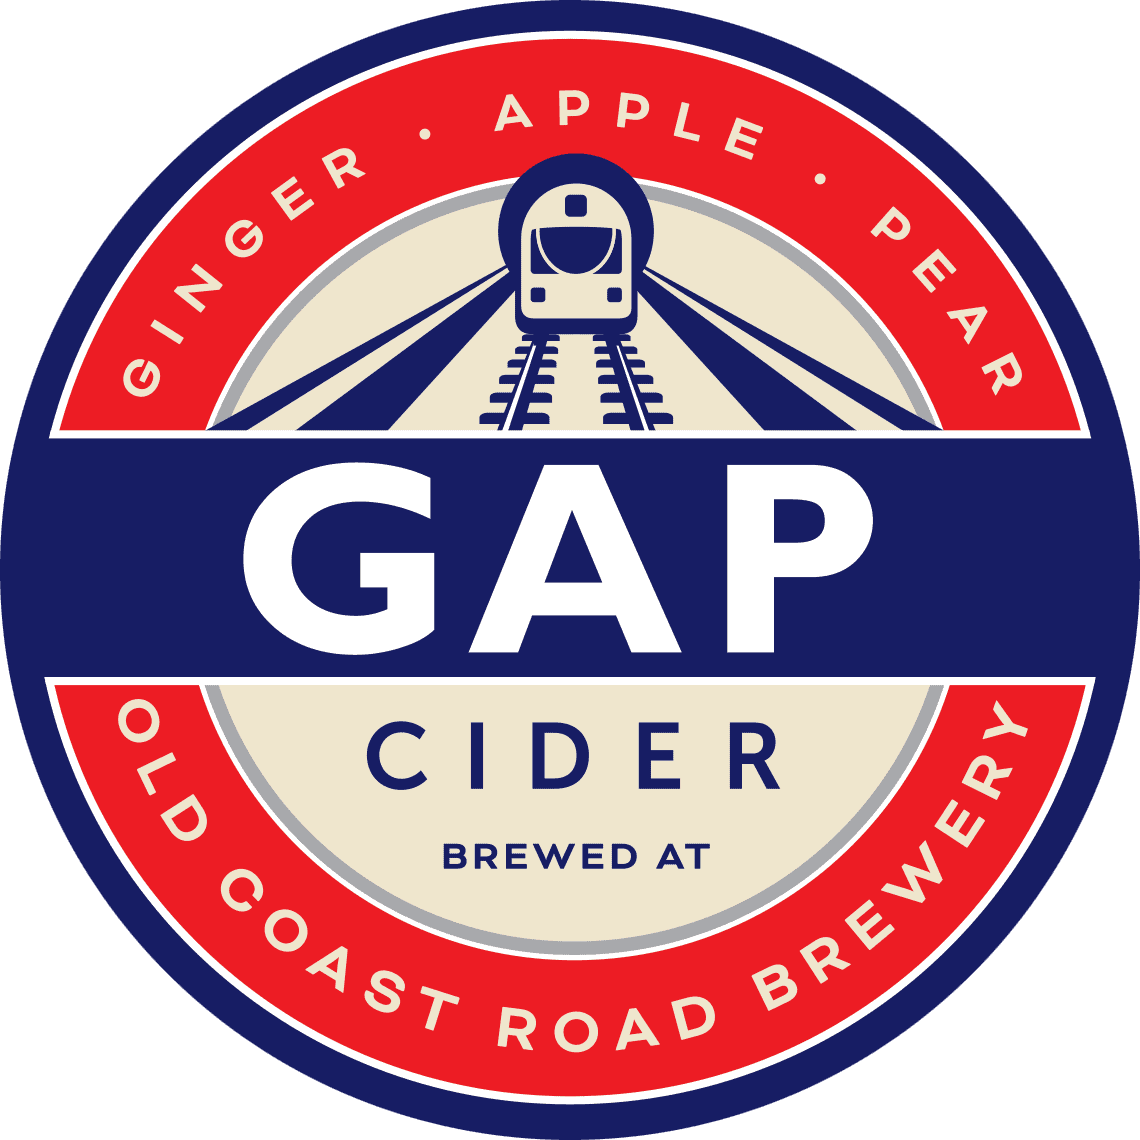 Our most popular cider. A unique blend of ginger, apple, and pear. If you like ginger you’ll love this.